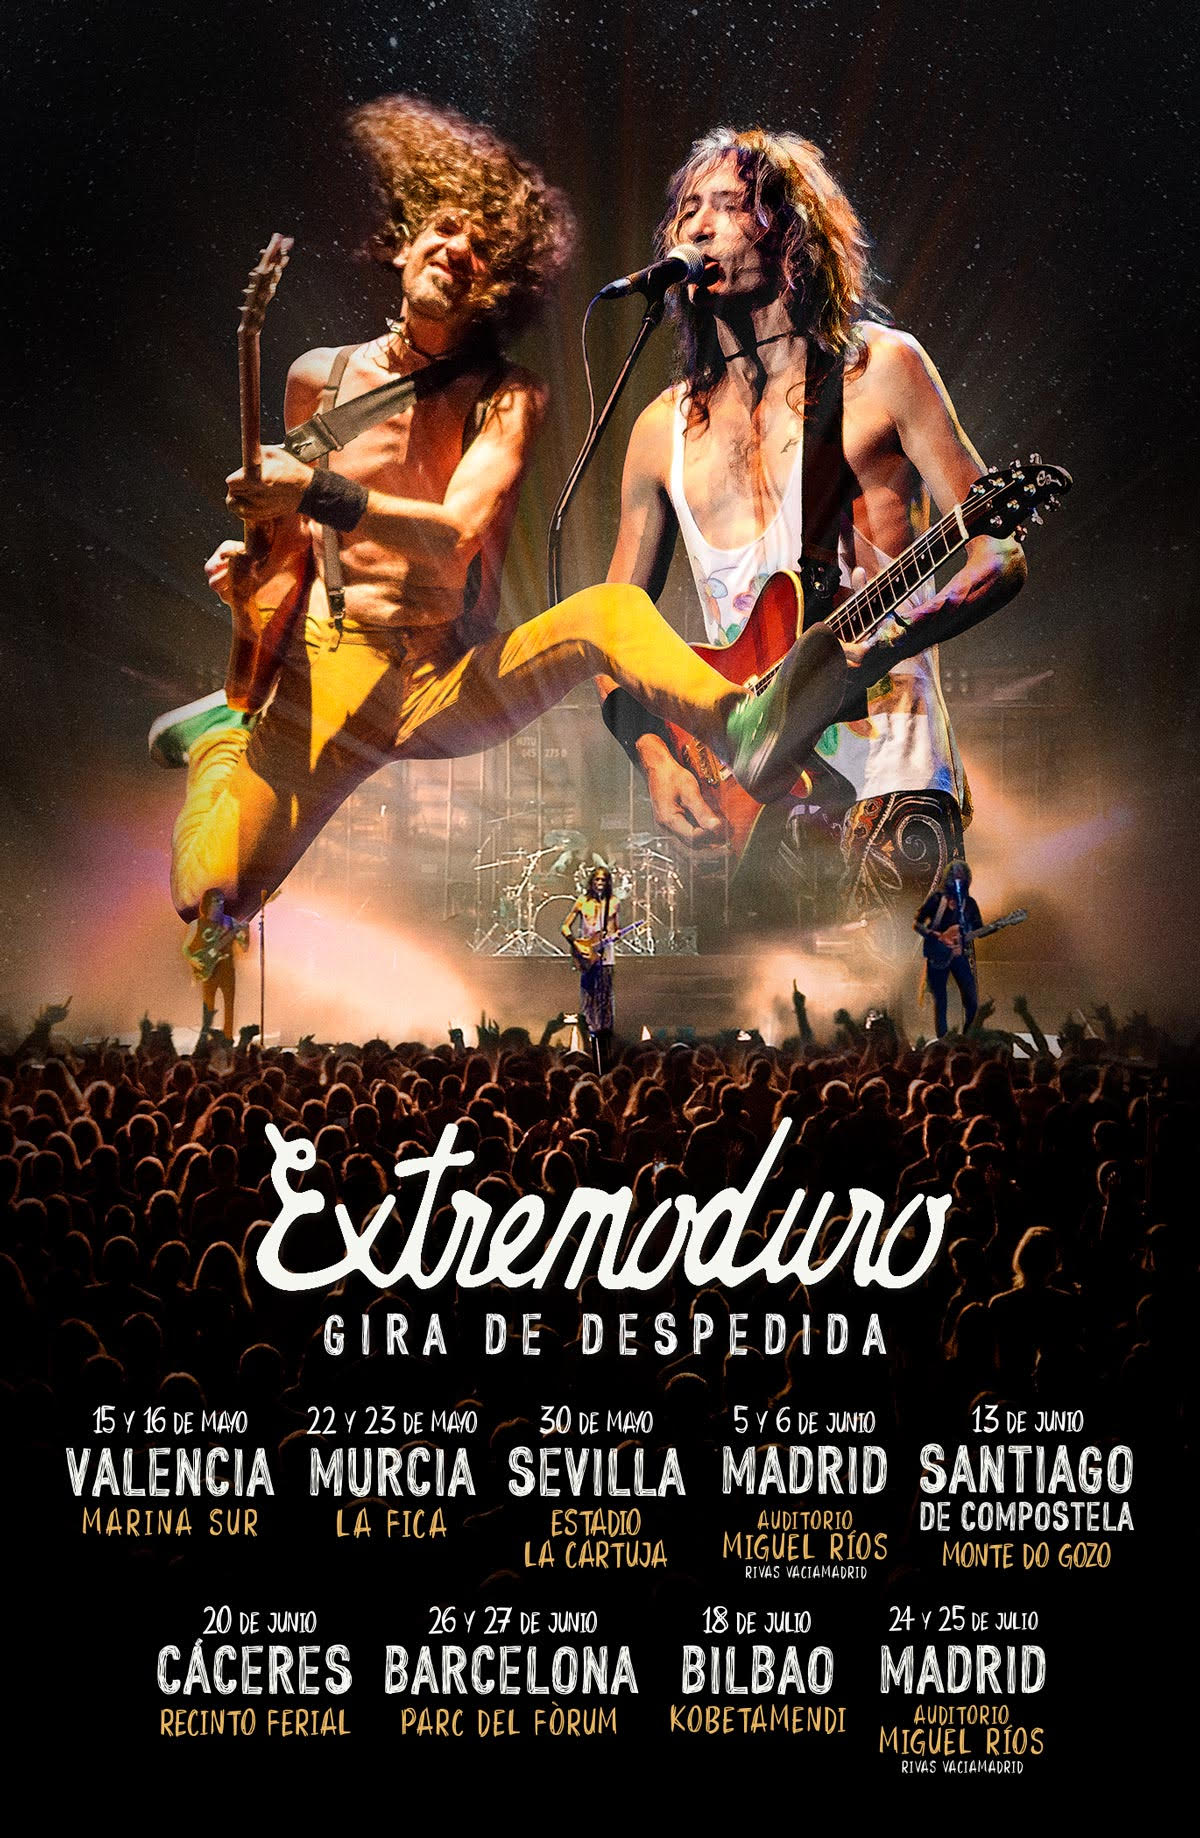 Extremoduro in Concert by Gratis in Barcelona